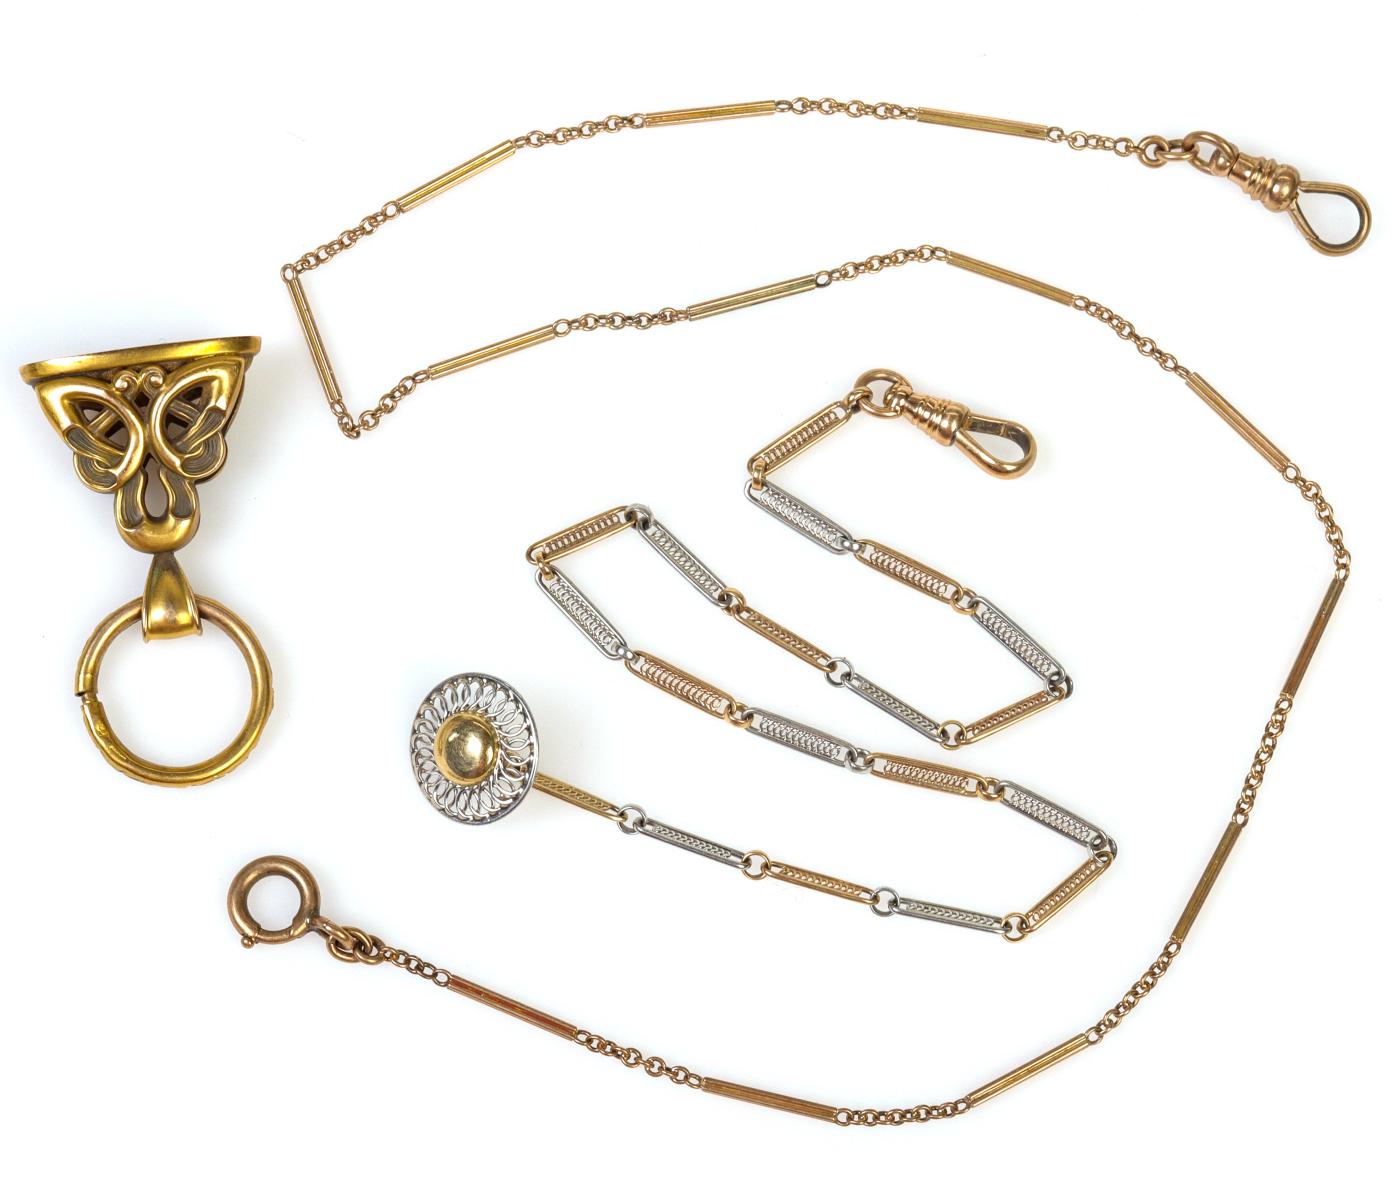 ANTIQUE 14K GOLD WATCH CHAINS AND FOB